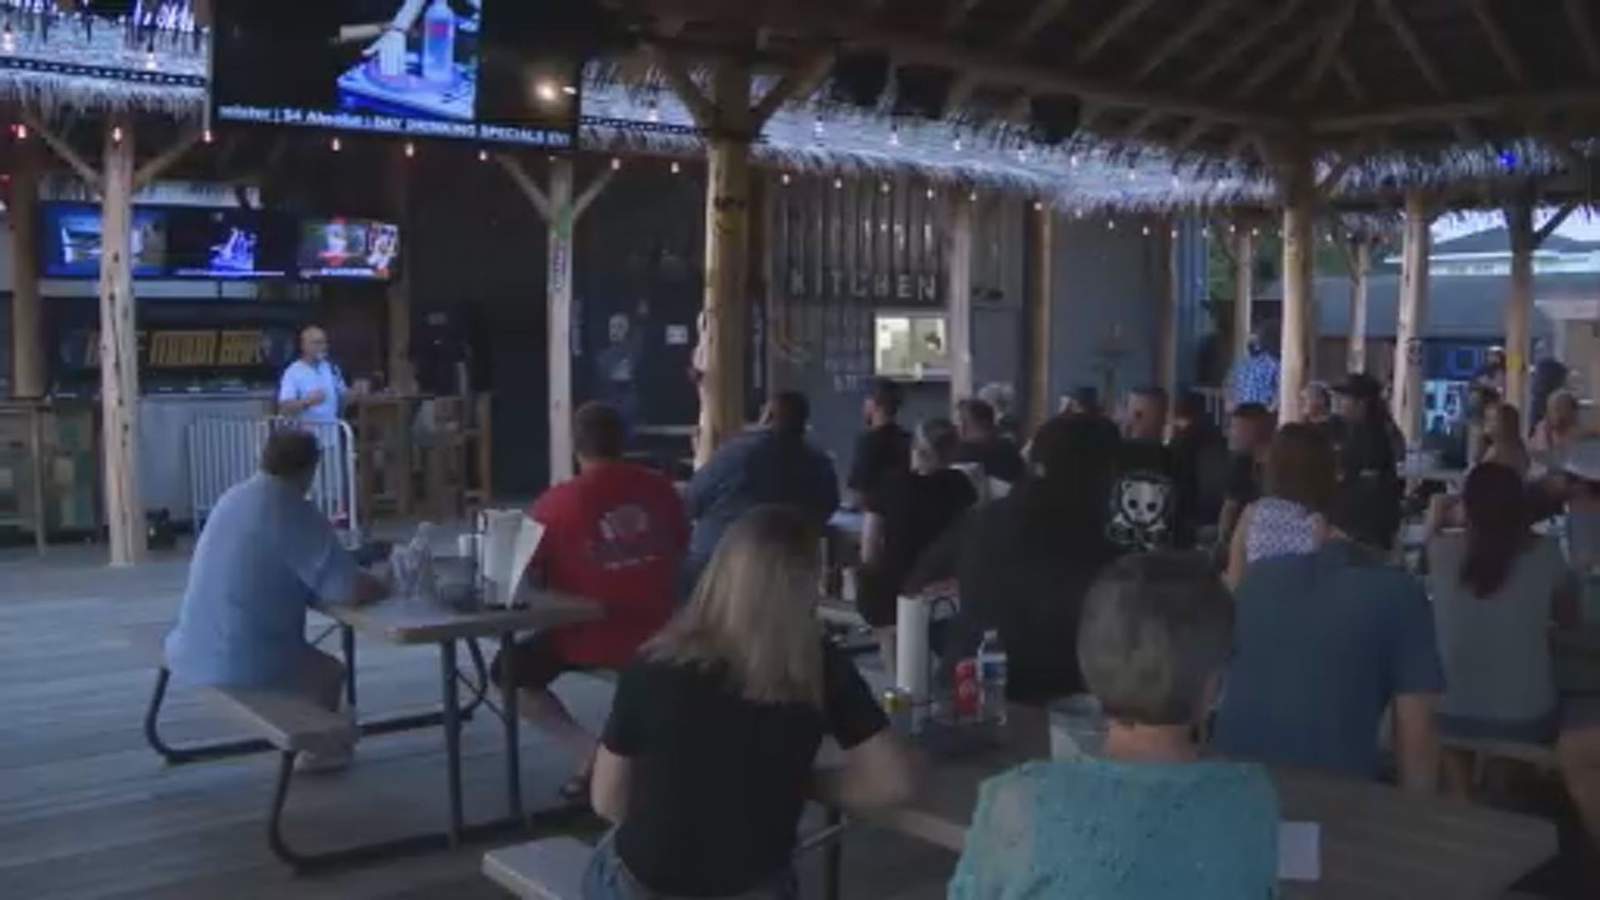 Kemah may enact ‘midnight curfew’ to combat violence; bar owners unhappy